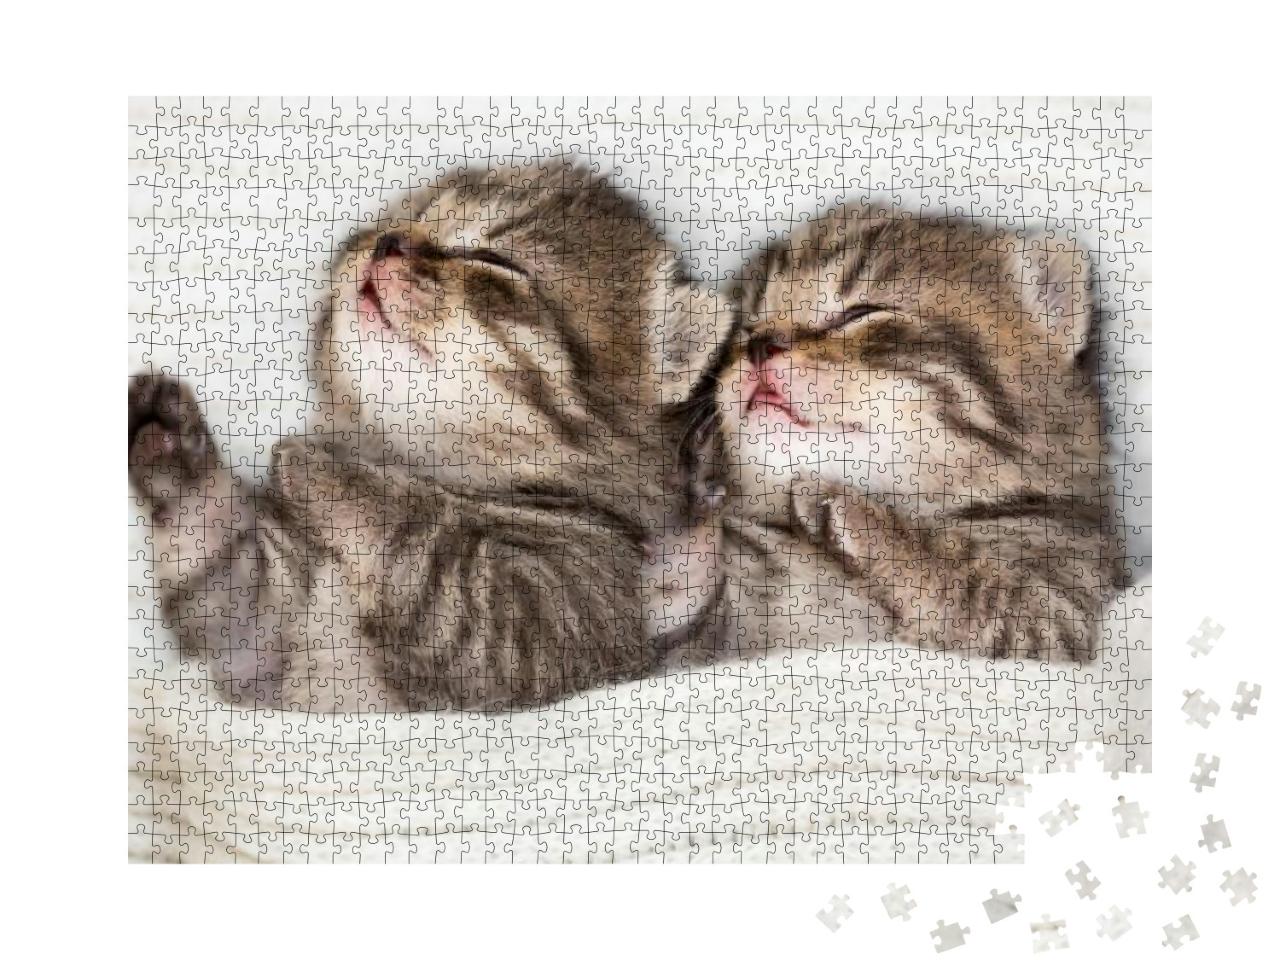 Two Sleeping Baby Kitten... Jigsaw Puzzle with 1000 pieces